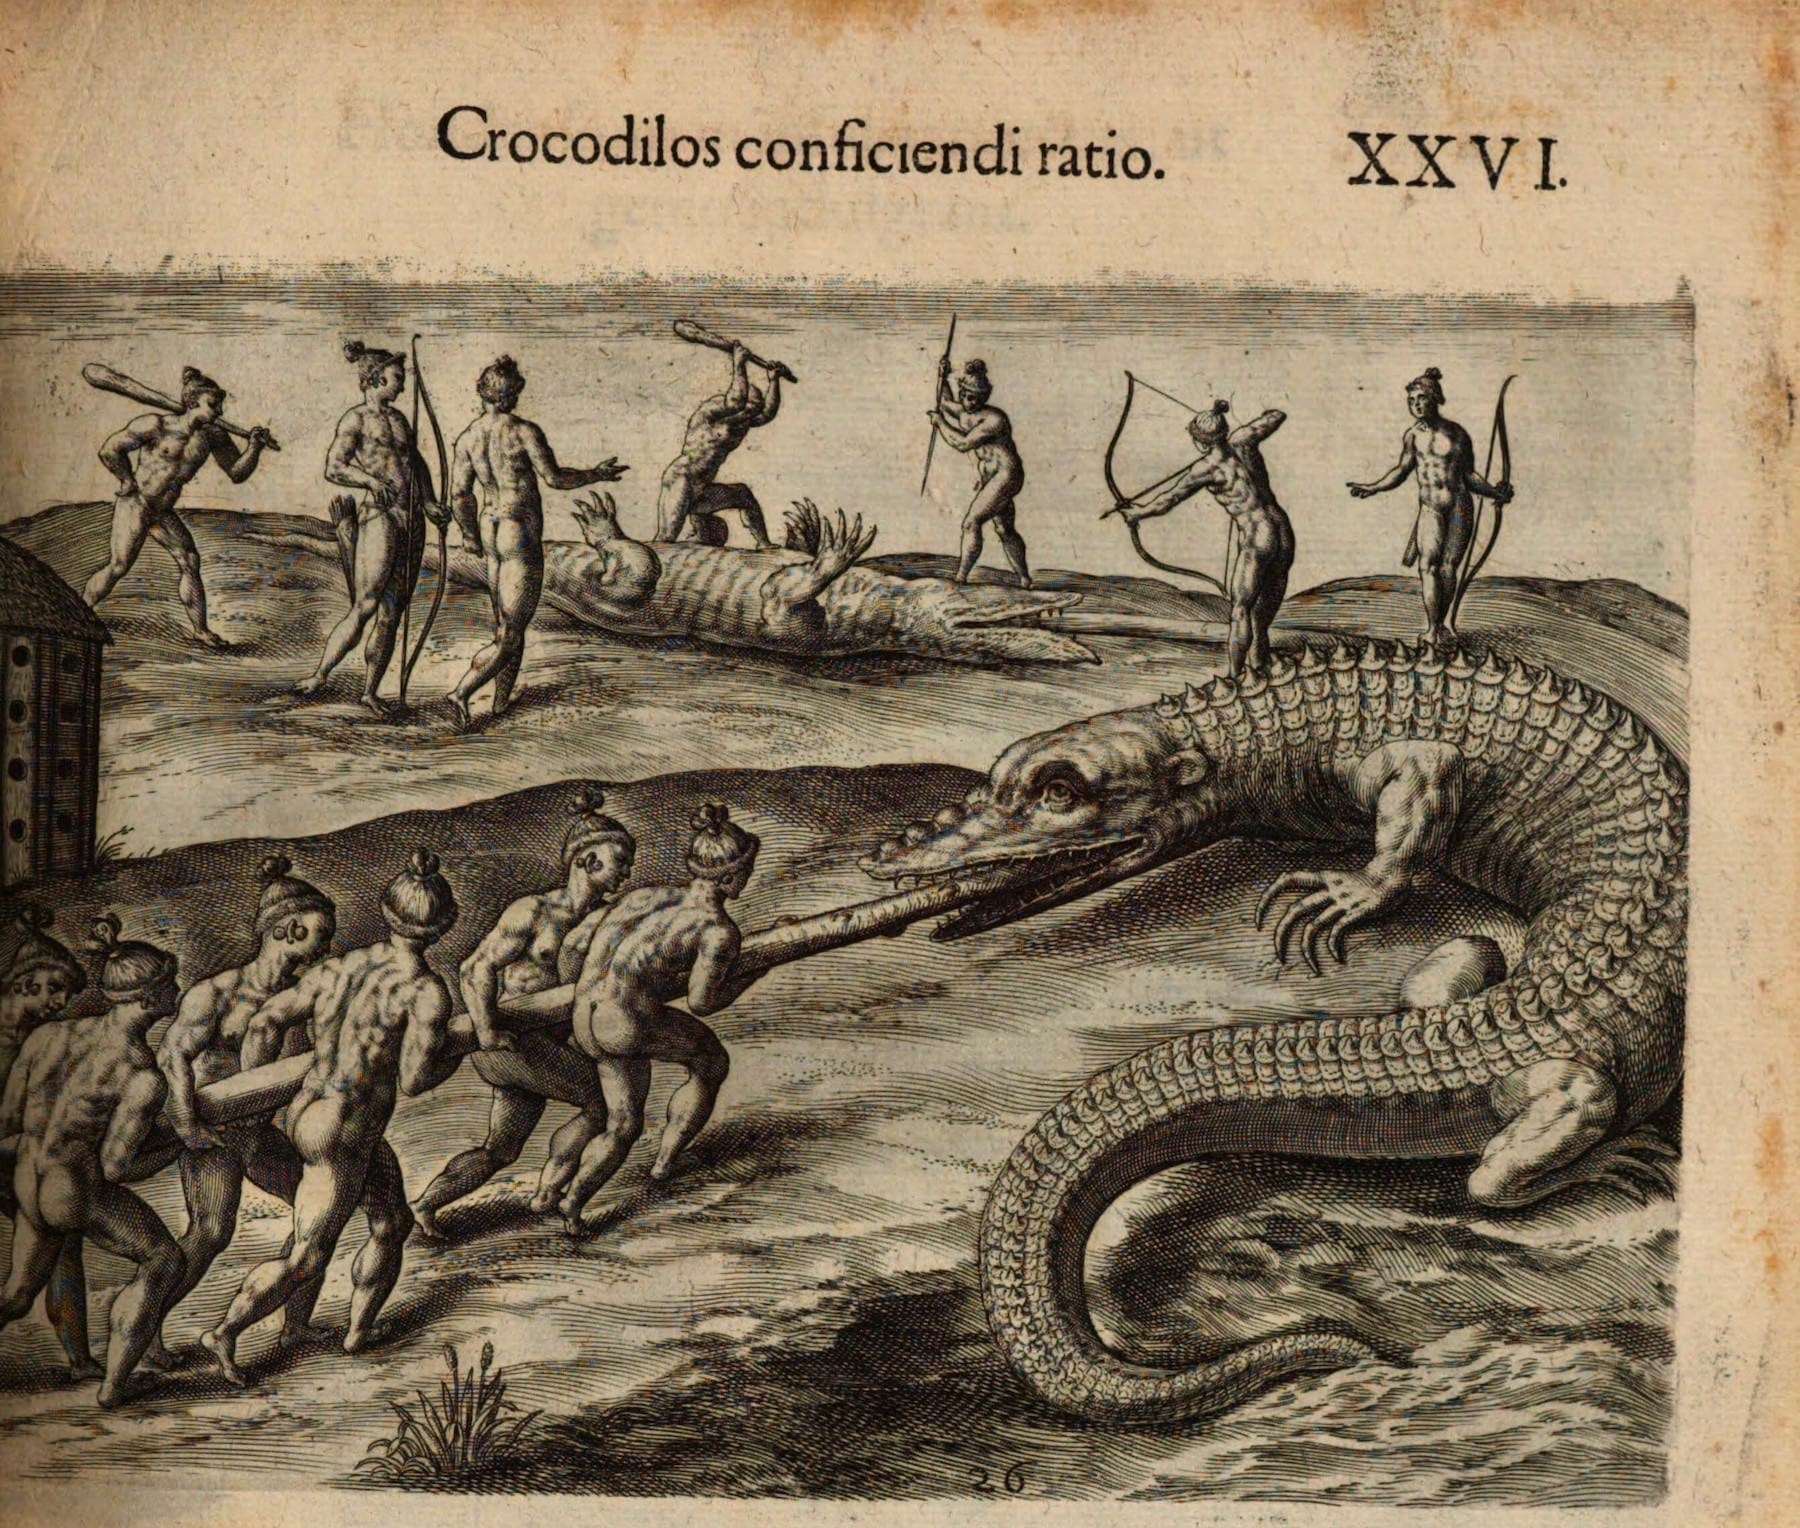 Historic illustration of native peoples fighting crocodiles, large reptiles